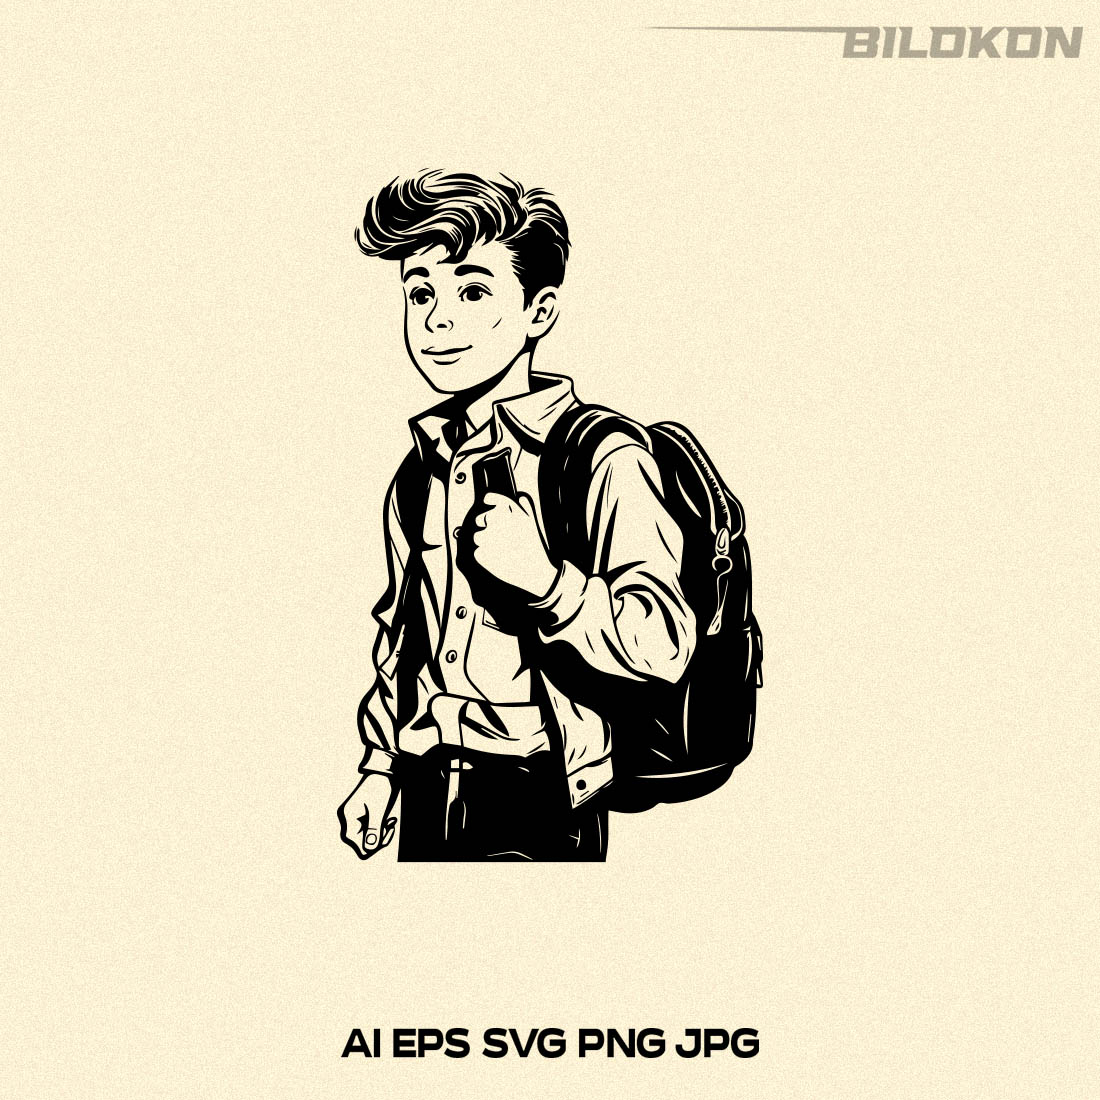 Vintage boy with a backpack goes to school, SVG Vector preview image.